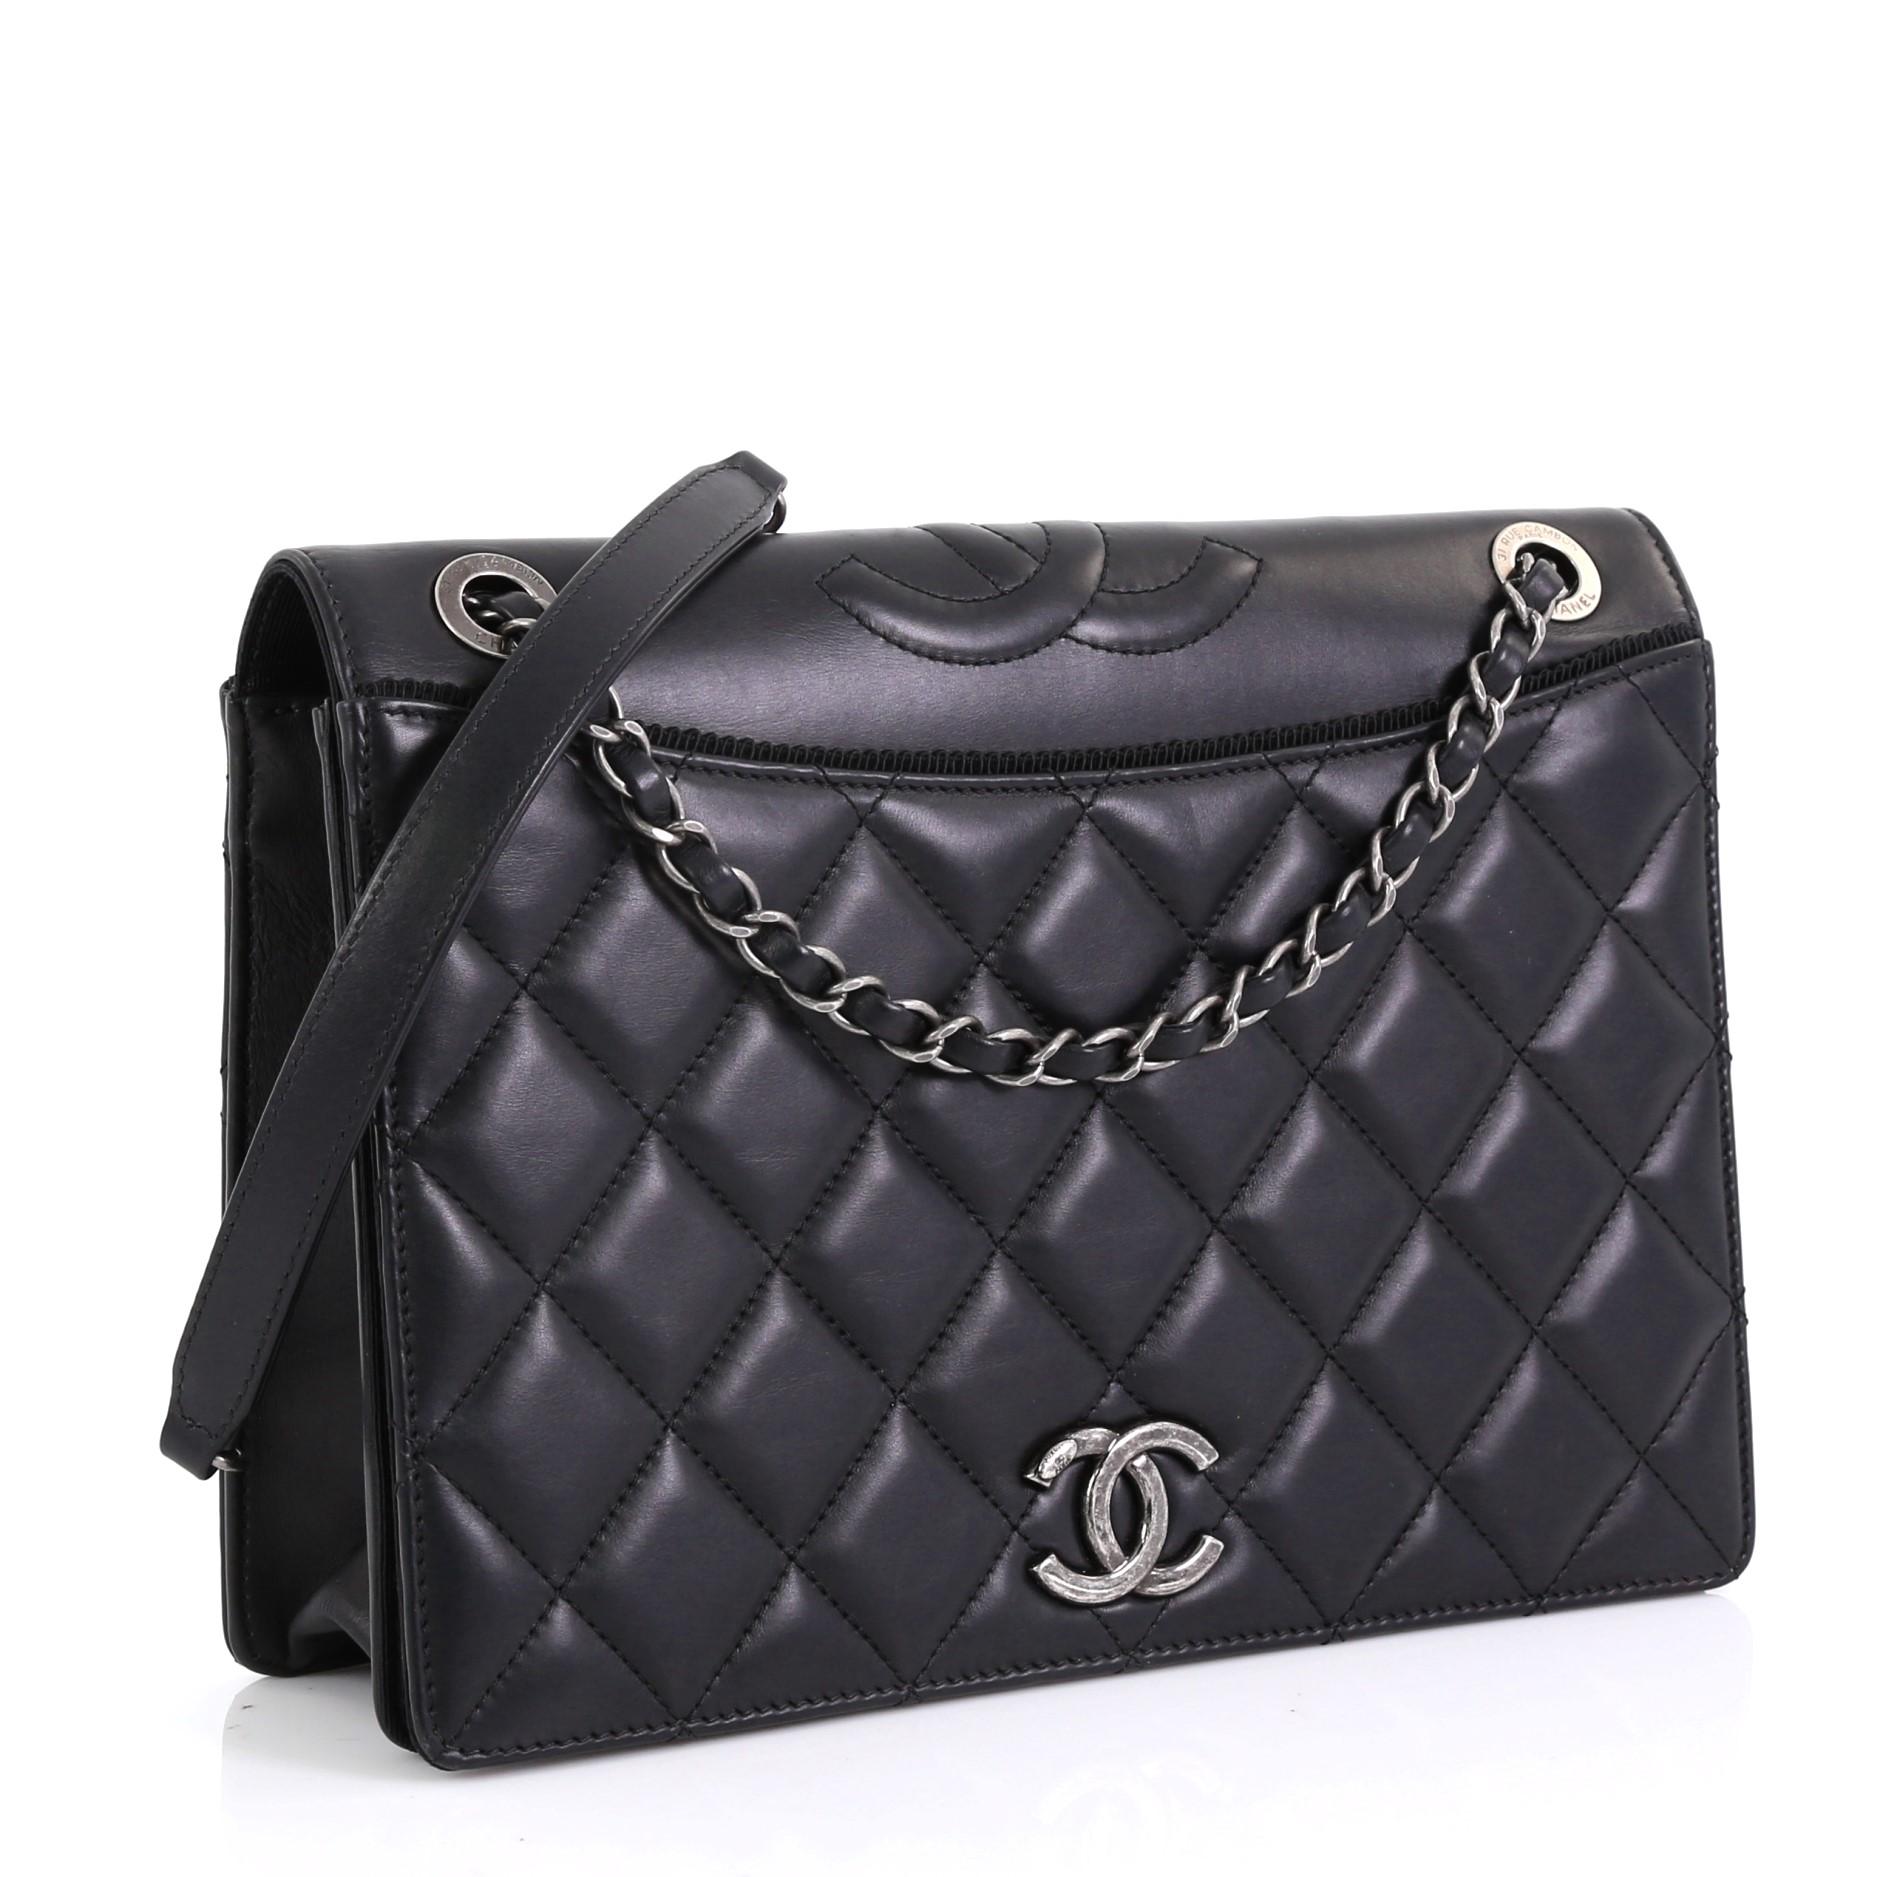 This Chanel Ballerine Flap Bag Quilted Lambskin Medium, crafted from black quilted lambskin leather, features woven-in leather chain strap with leather pad, CC logo at front flap, and ruthenium-tone hardware. Its magnetic snap closure opens to a red